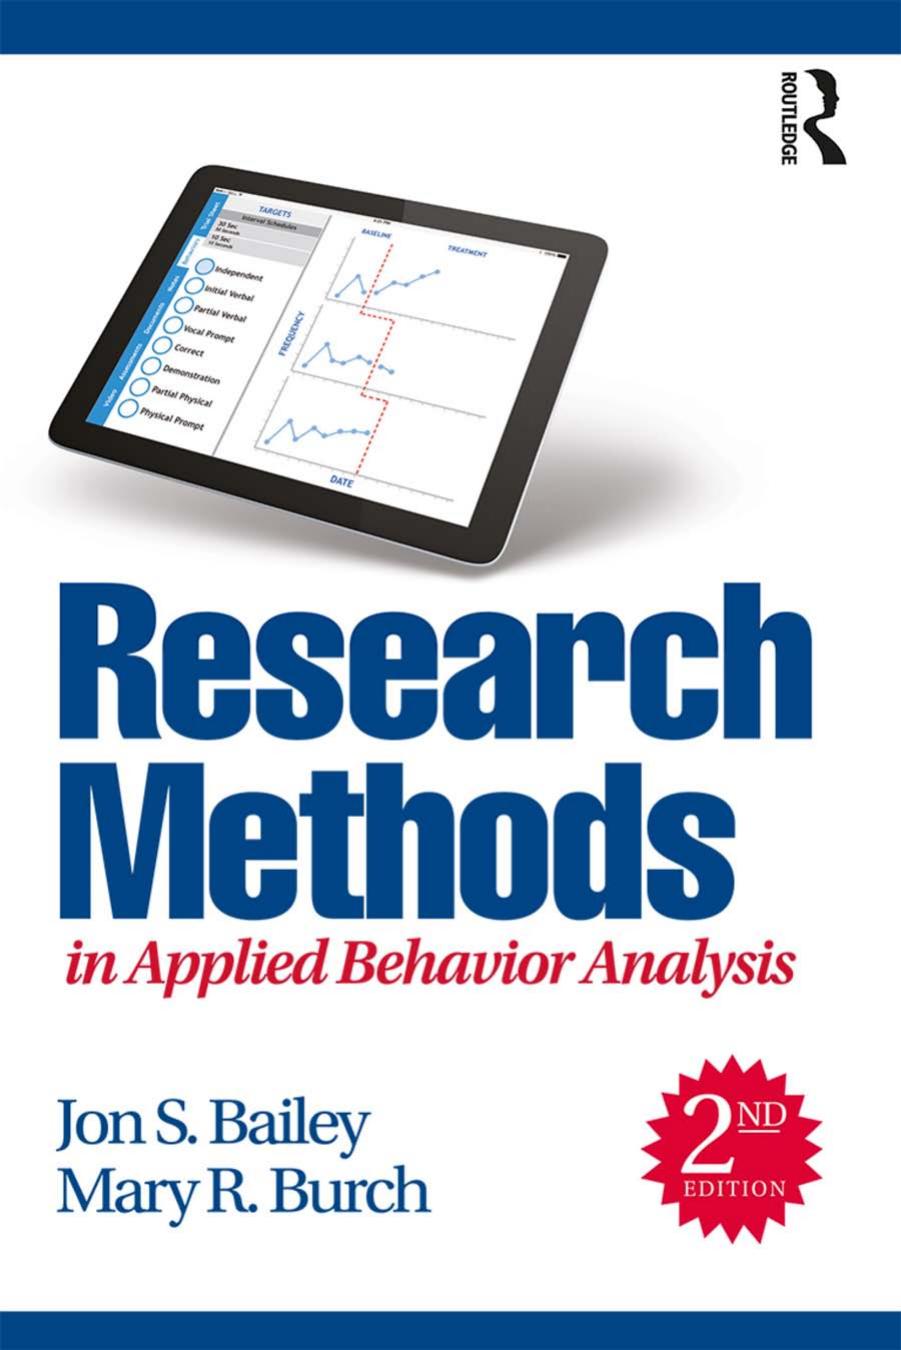 Research Methods in Applied Behavior Analysis  2nd Edition by Jon S. Bailey  , Mary R. Burch 